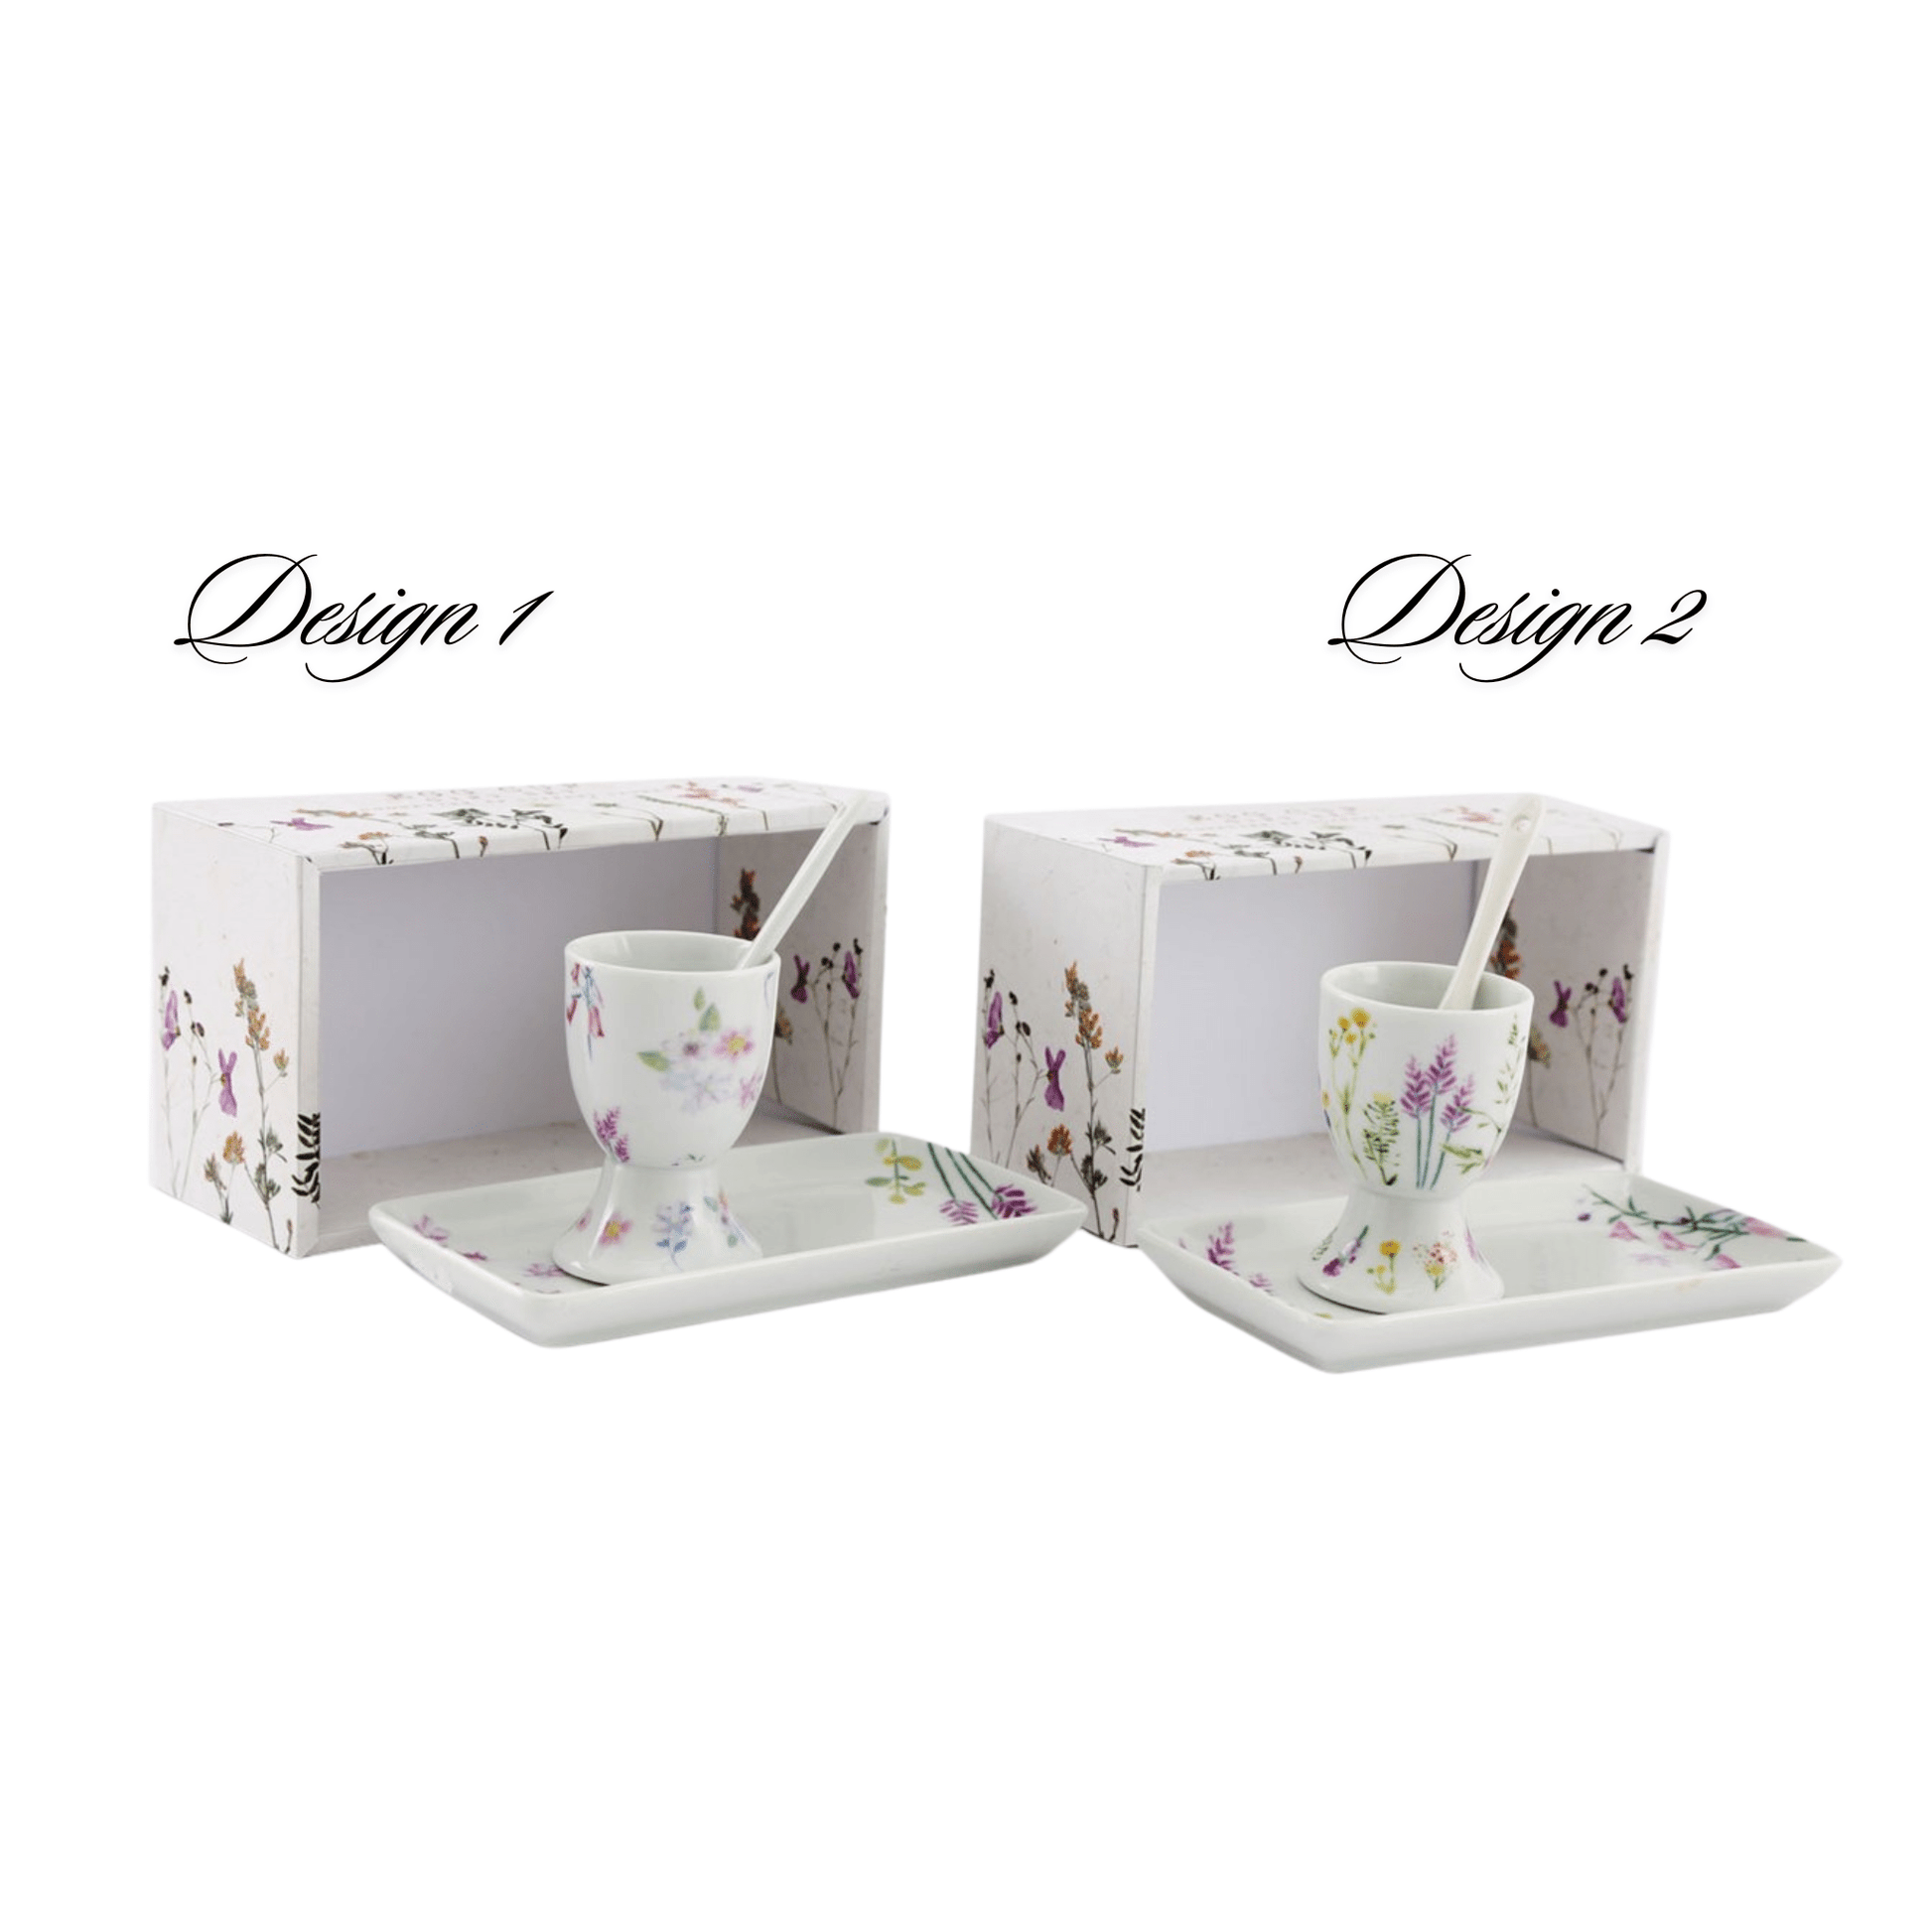 Flower Eggcup, Dish and Spoon Set - Peppy & Sage